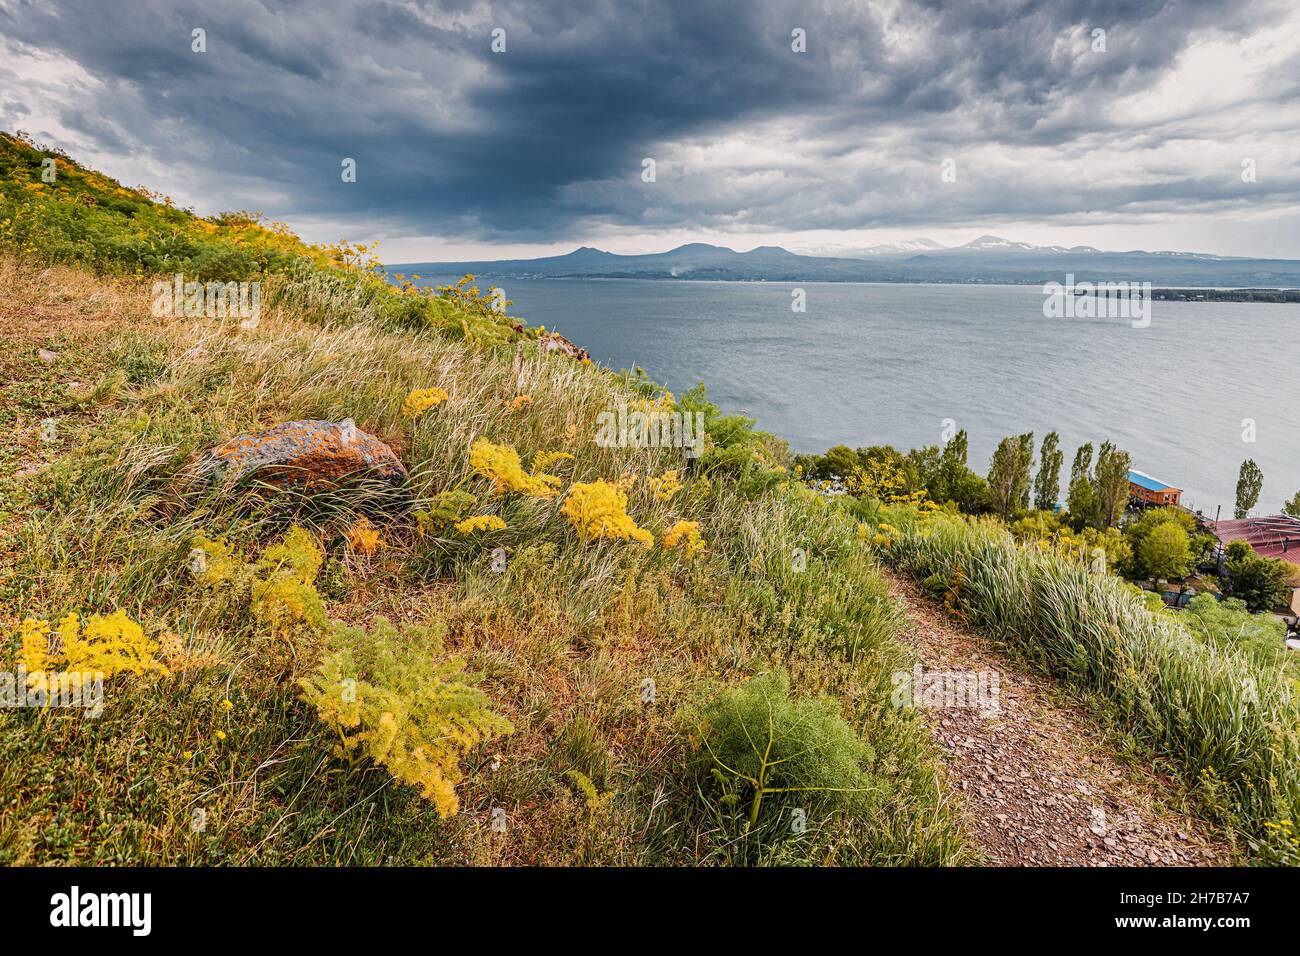 Dramatic landscape in stormy weather with strong wind on Lake Sevan. Natural travel destinations in Armenia Stock Photo